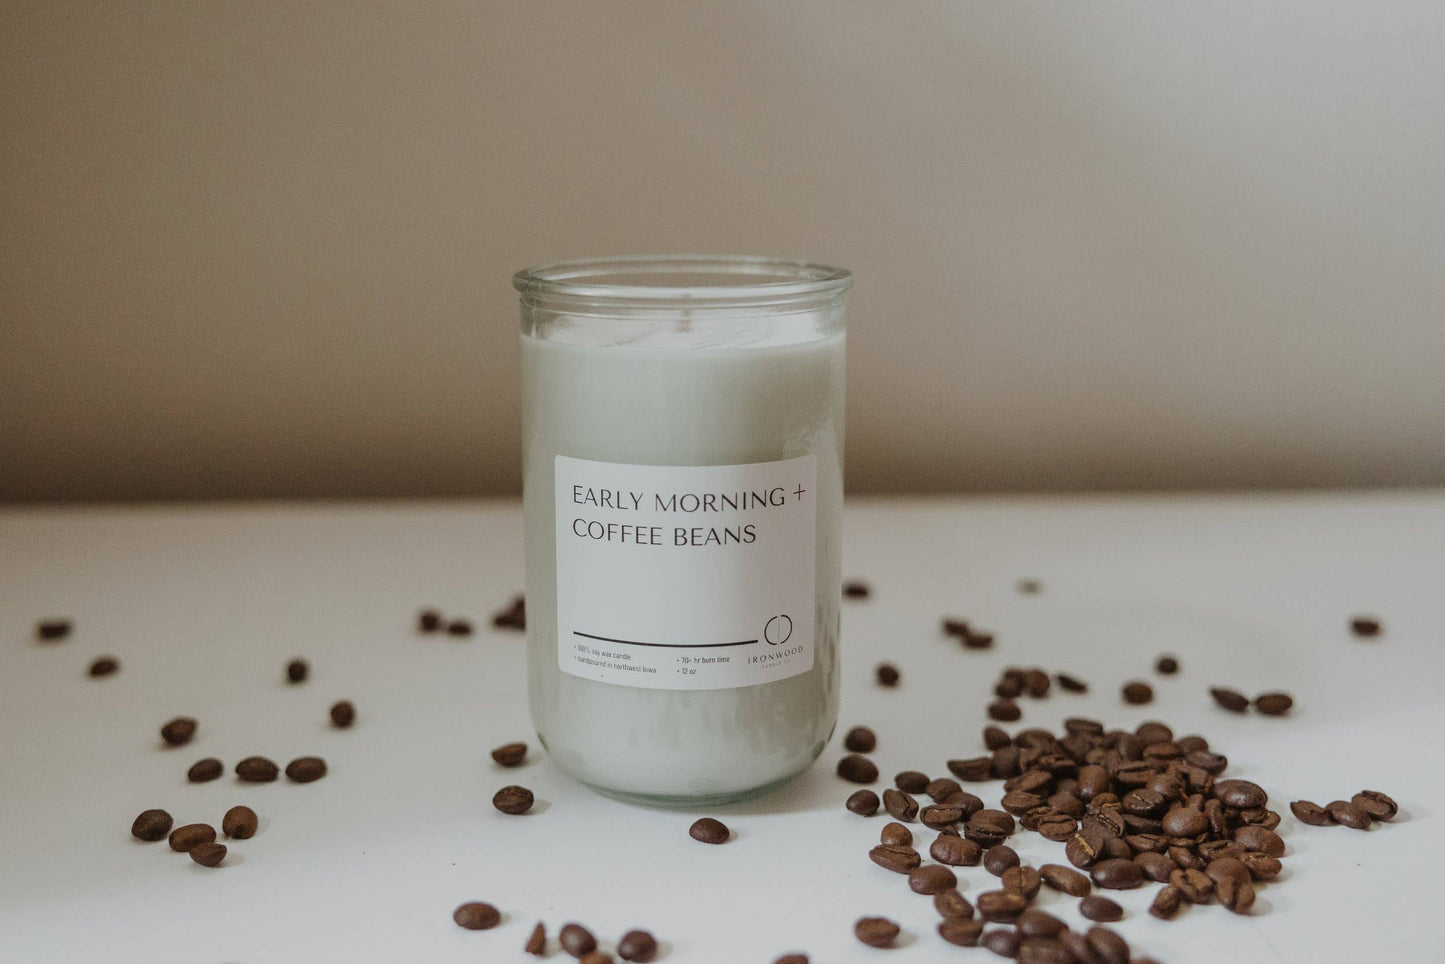 EARLY MORNING + COFFEE BEANS CANDLES: 9oz vessel – 7.5oz wax - Amber